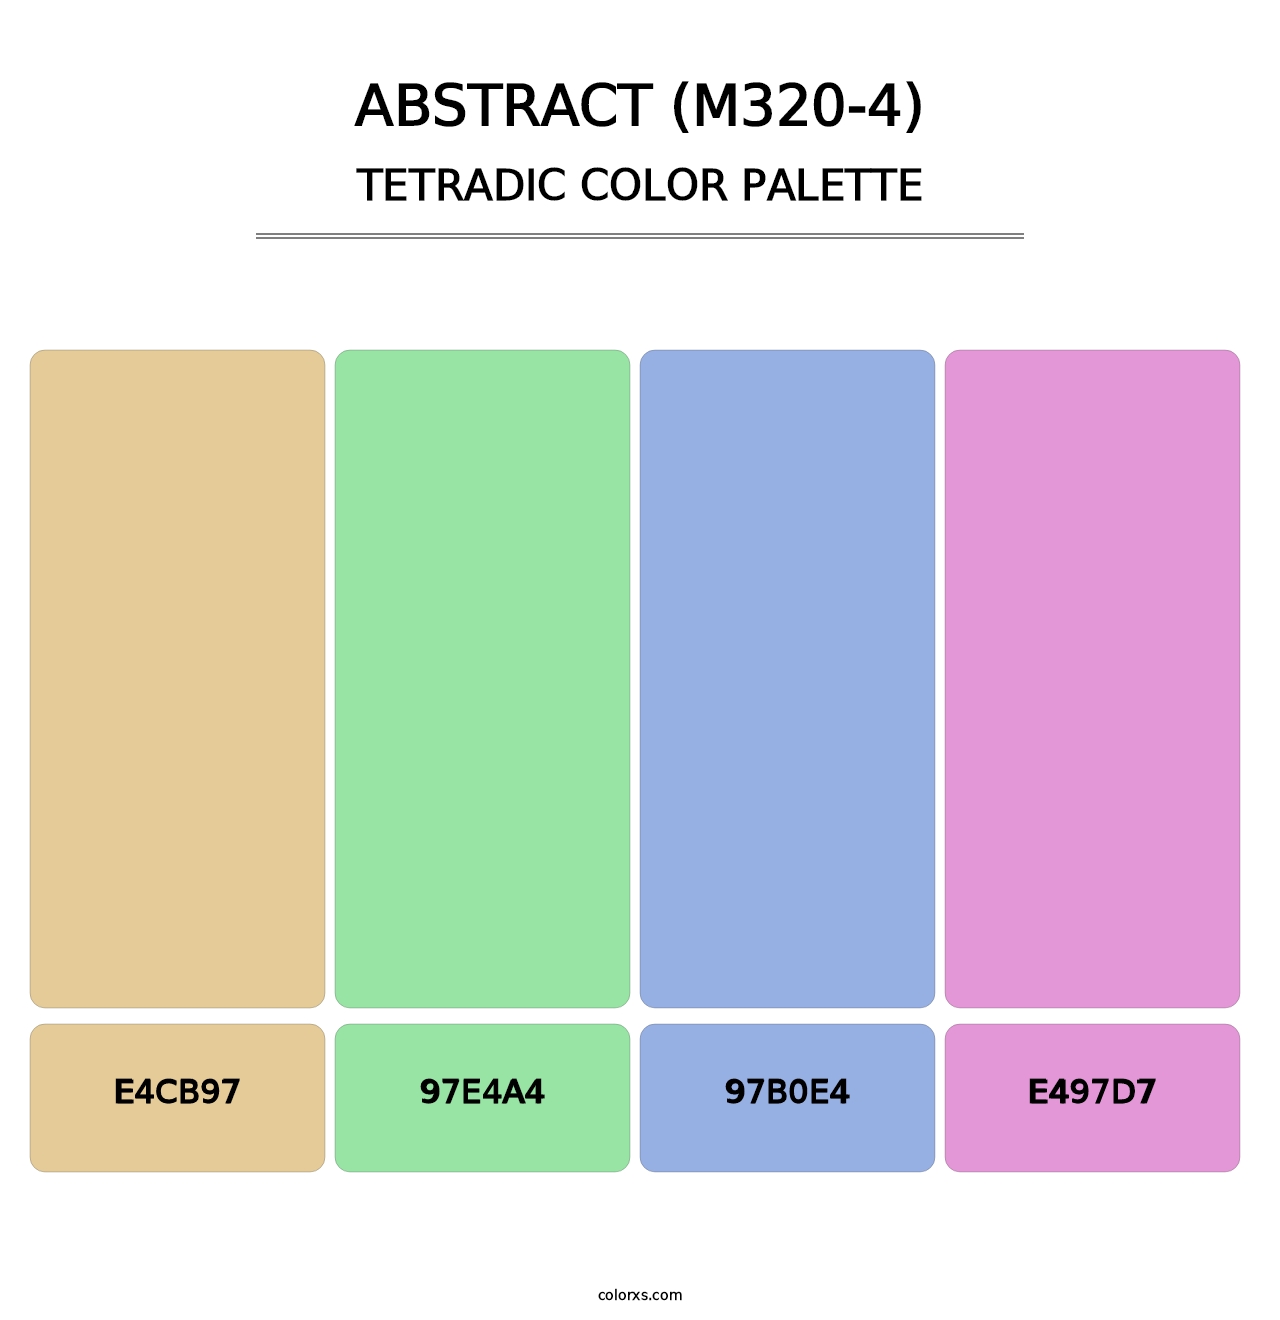 Abstract (M320-4) - Tetradic Color Palette